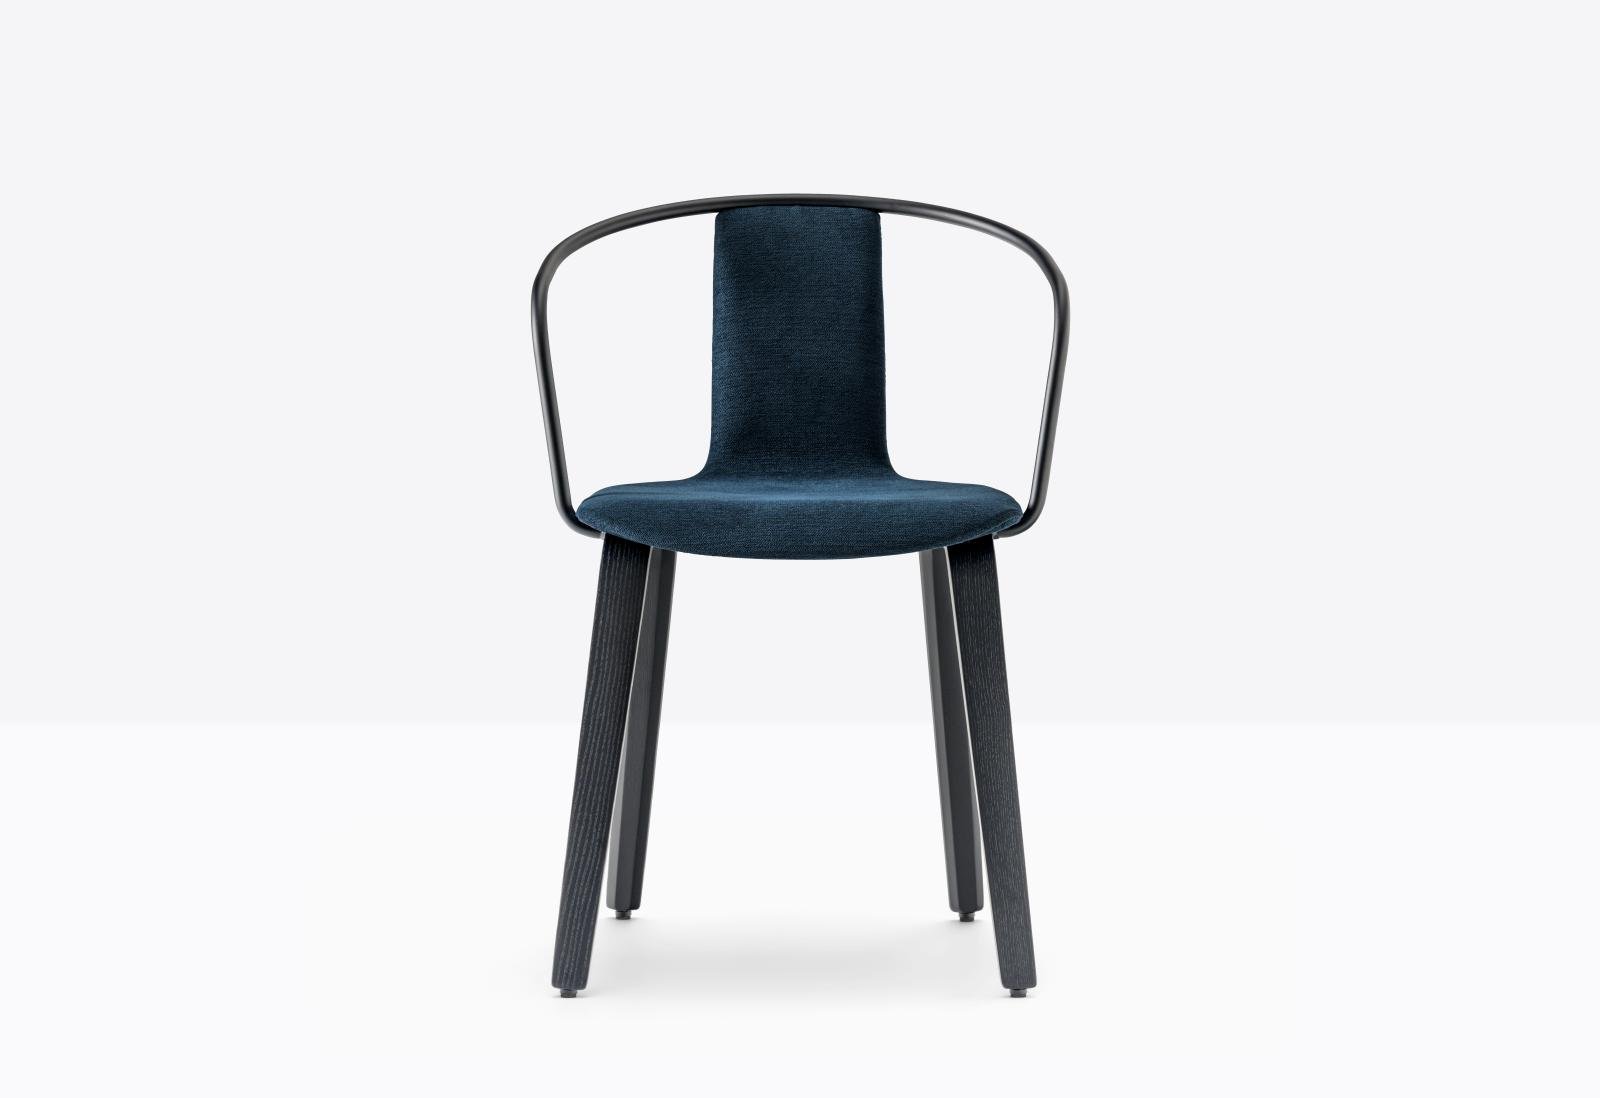 Jamaica Chair from Pedrali, designed by CMP Design